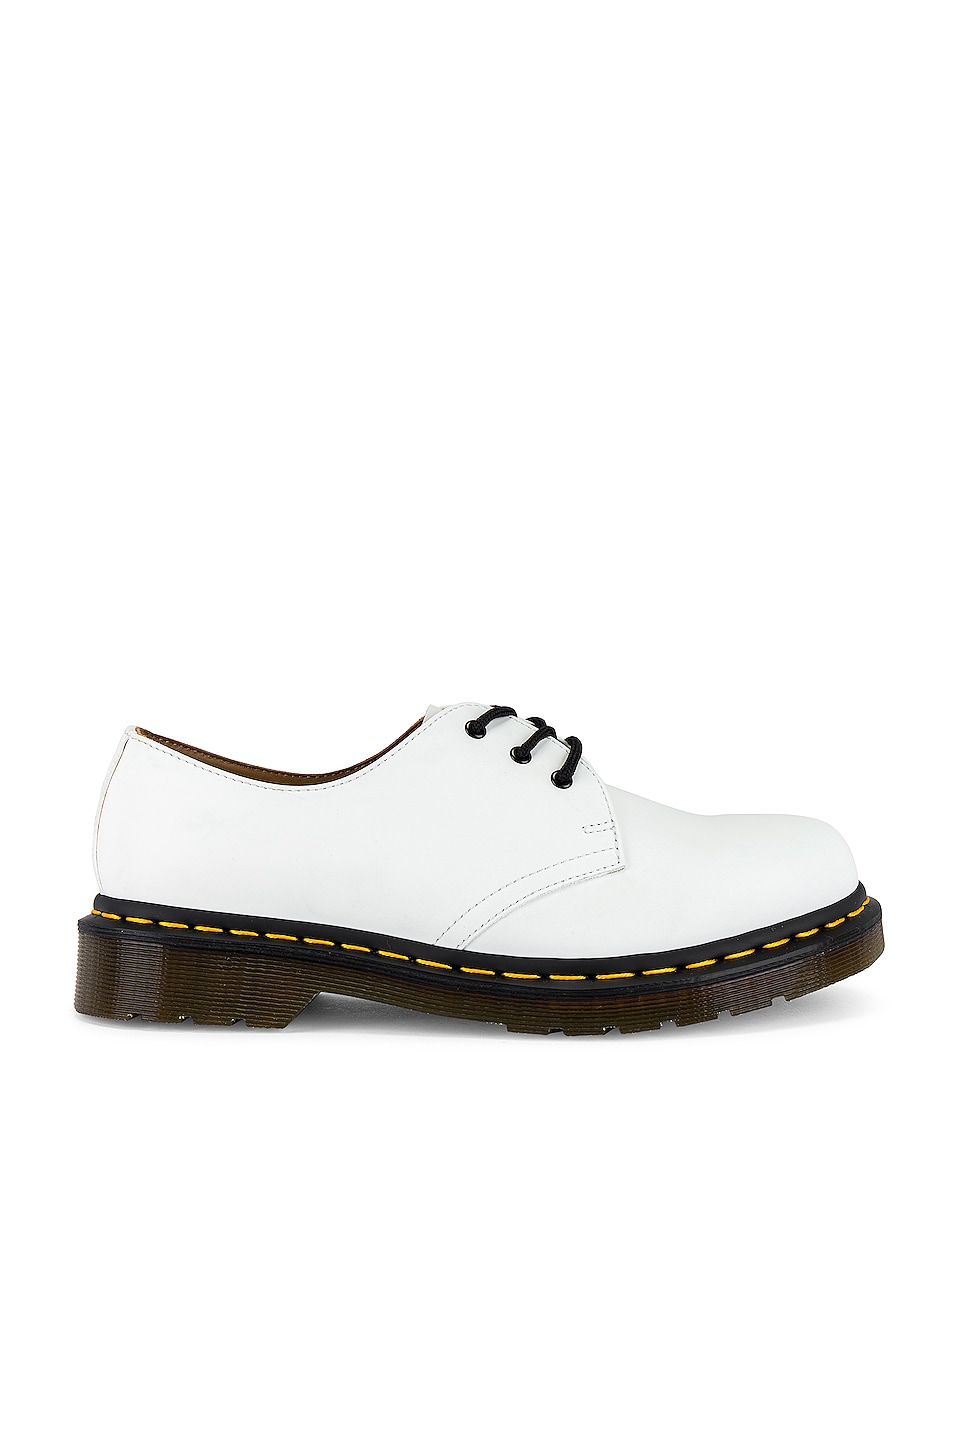 Dr. Martens 1461 Smooth Buck White